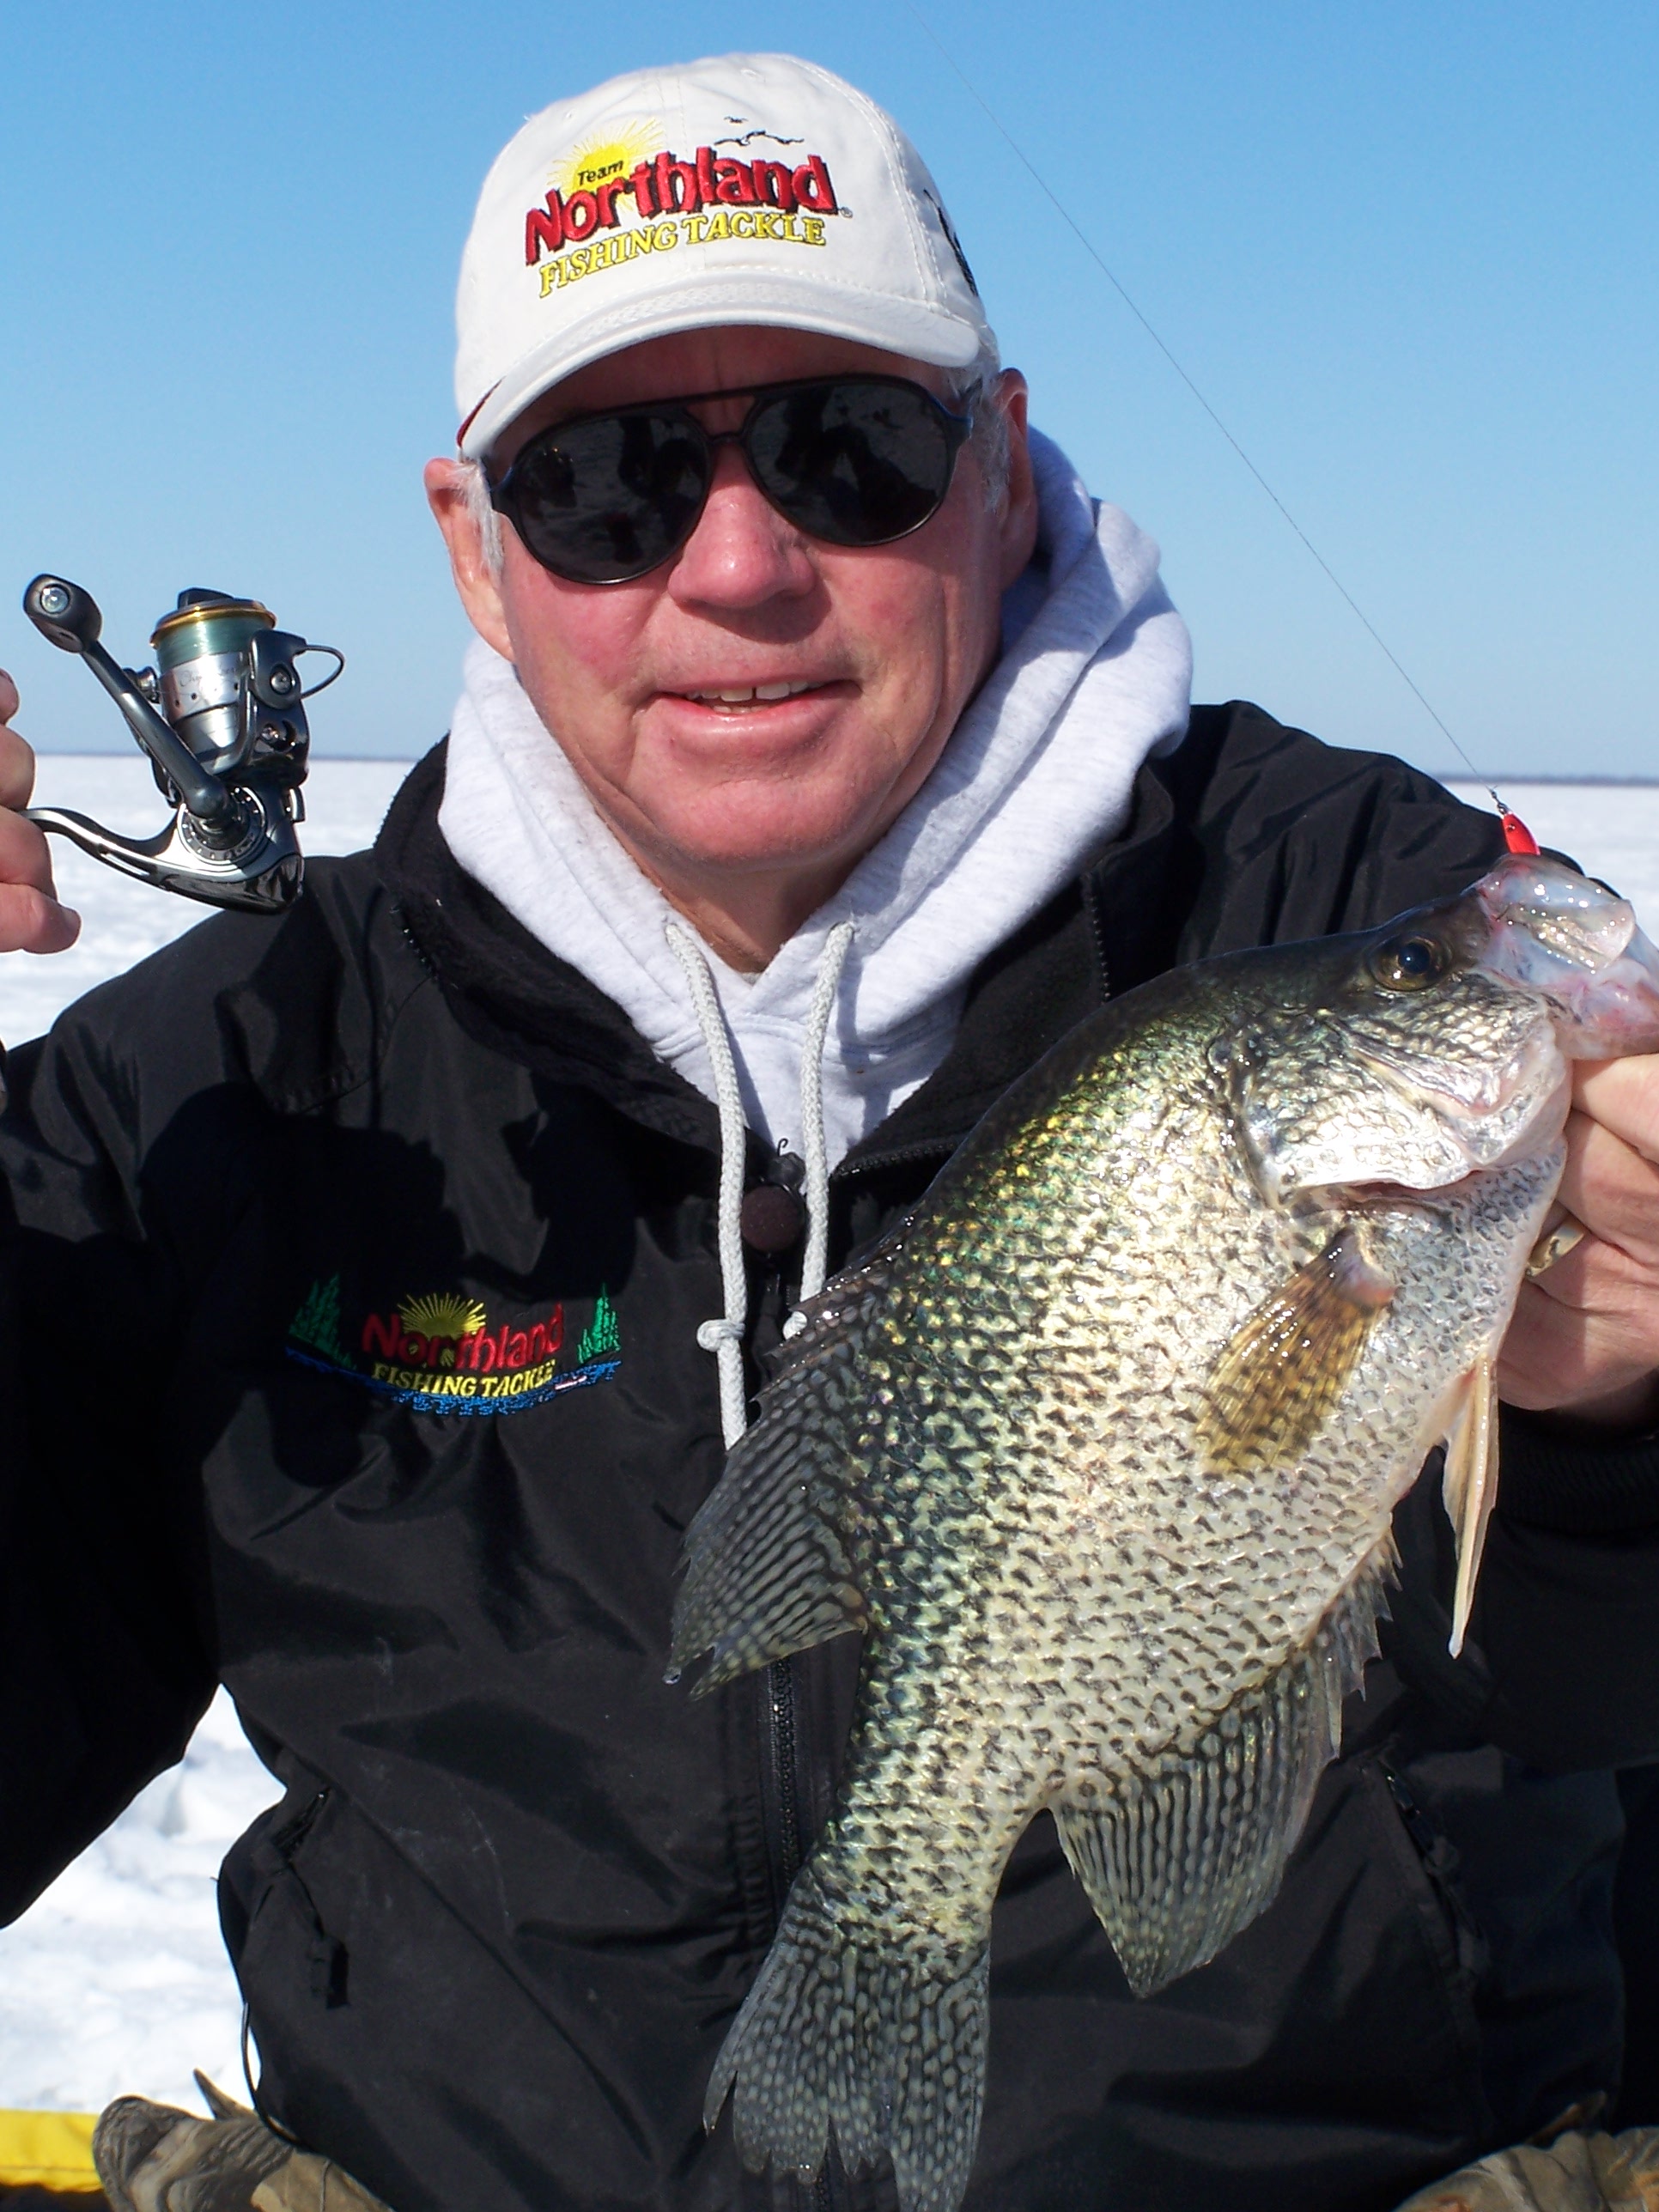 An ice fisherman showing off a crappie that he caught.